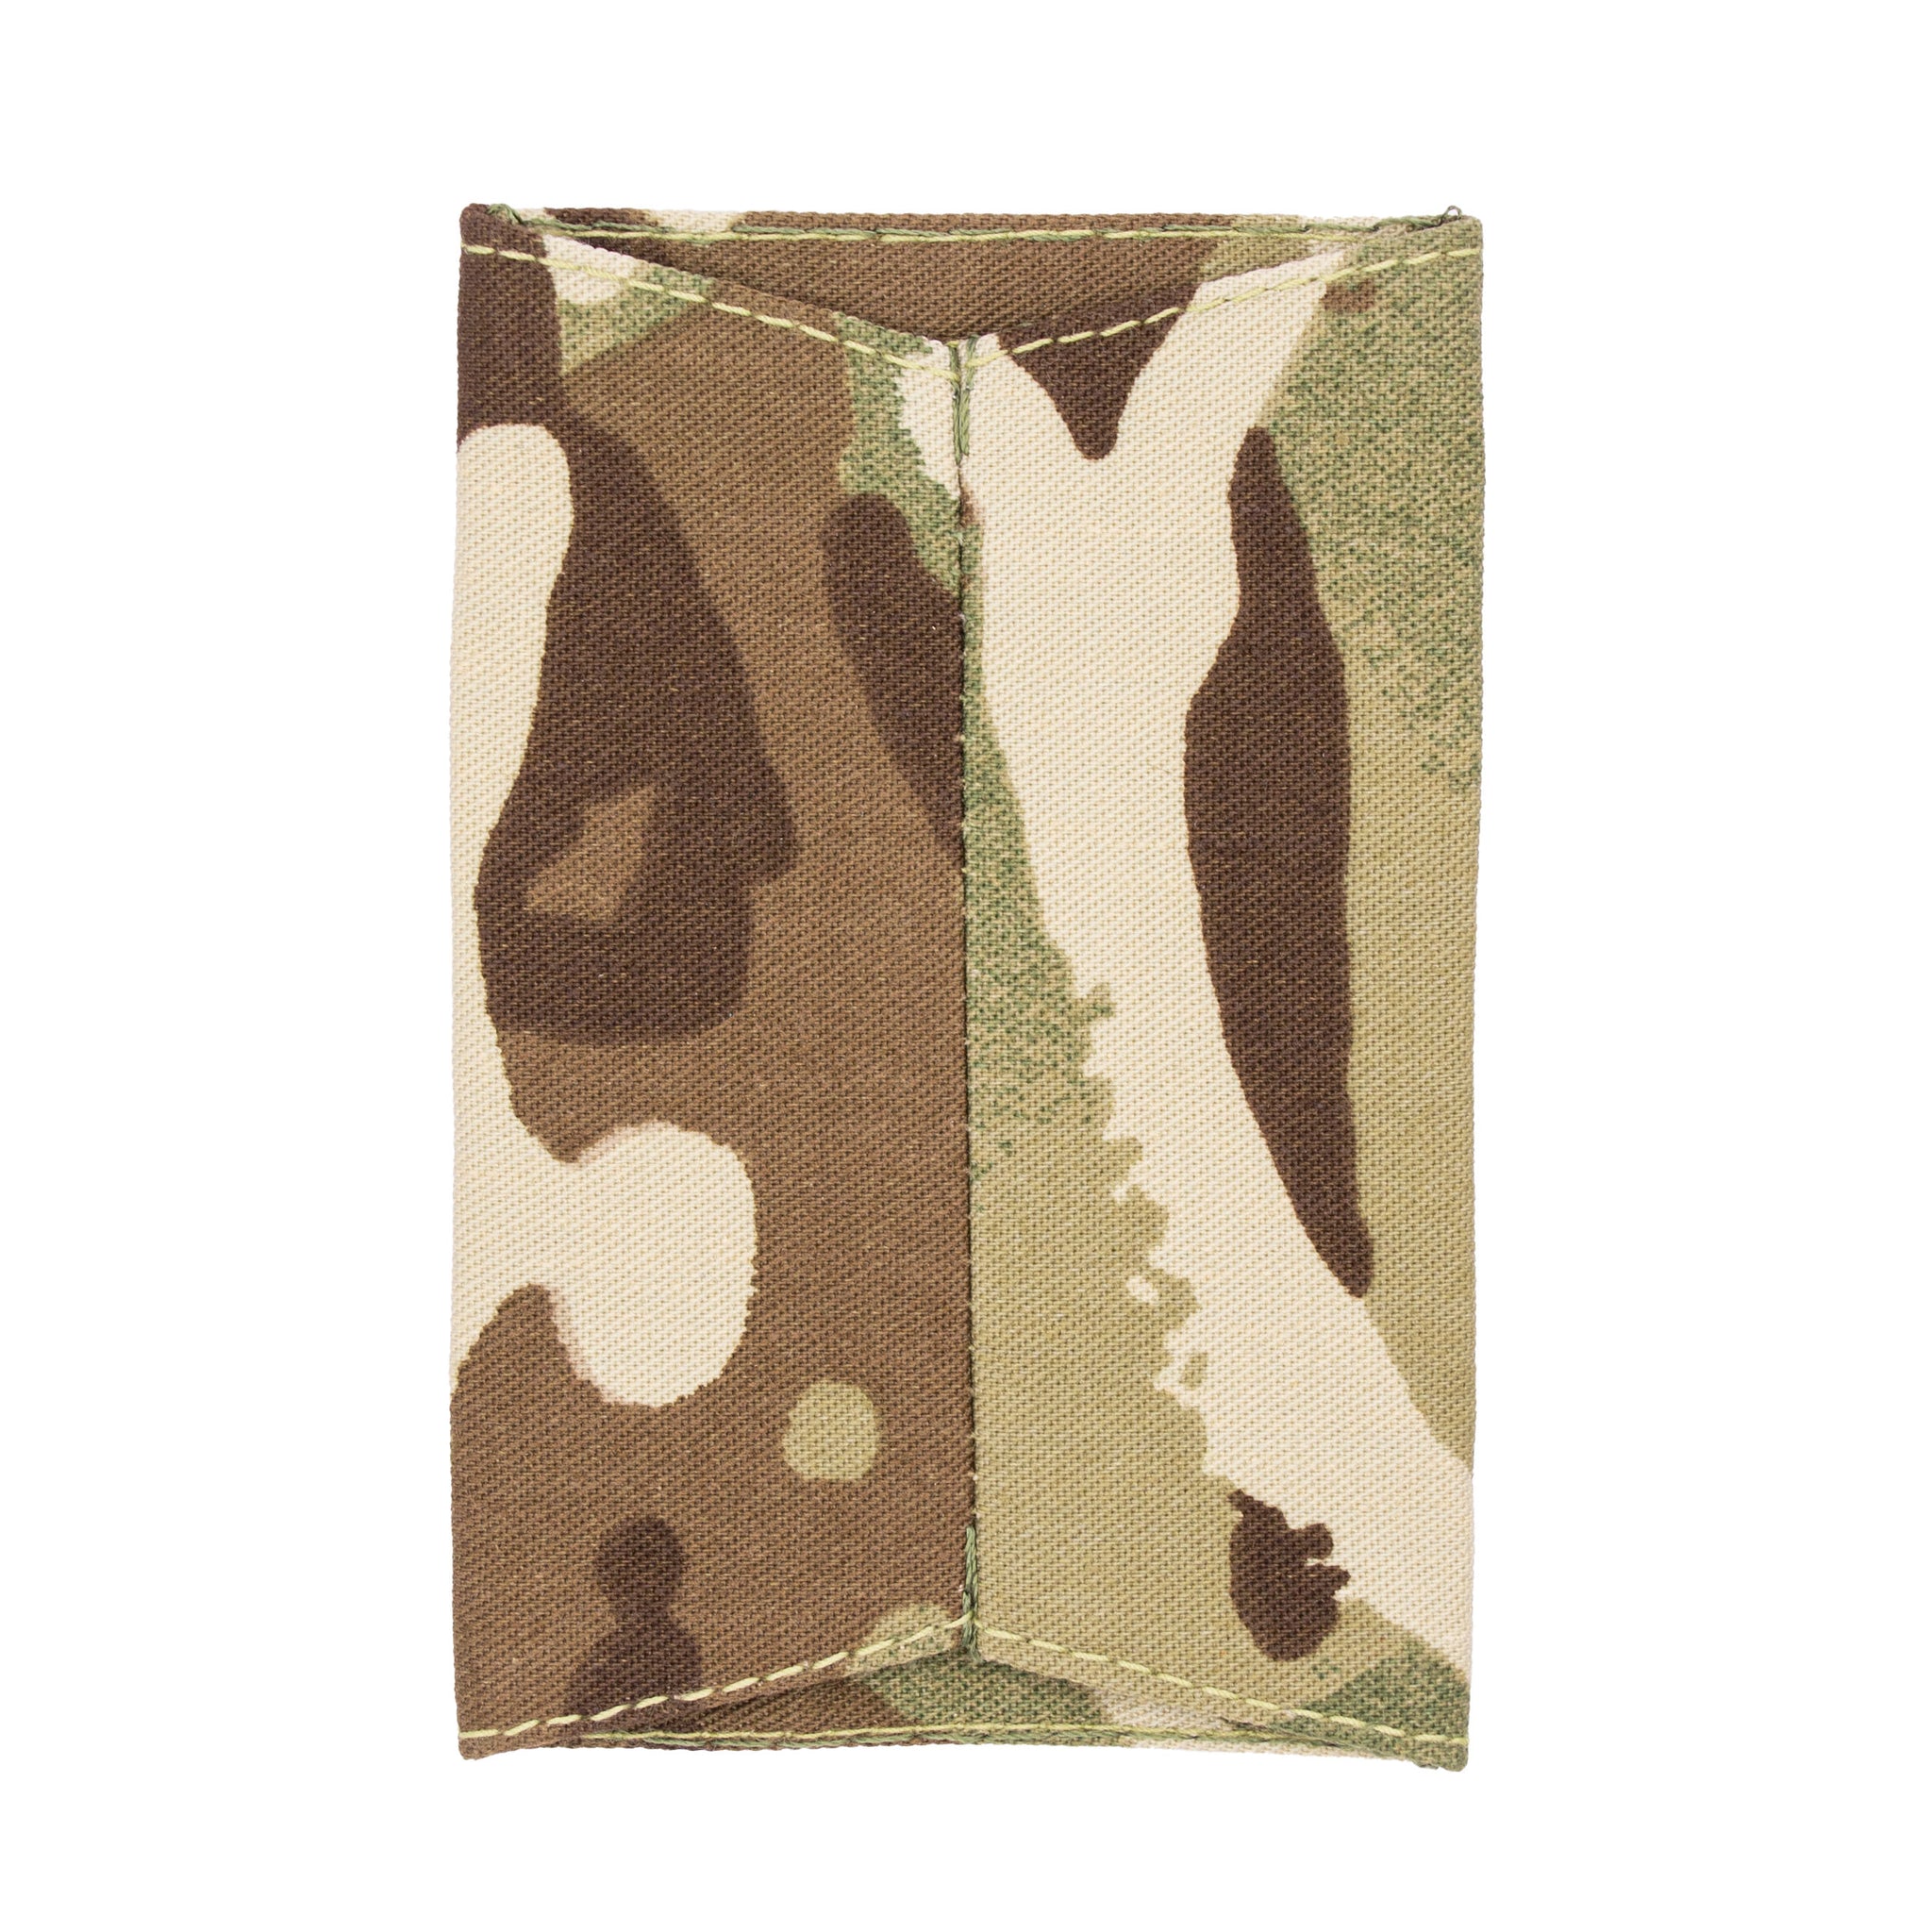 Sergeant Slider Epaulette For The British Army Cadet Force (ACF)